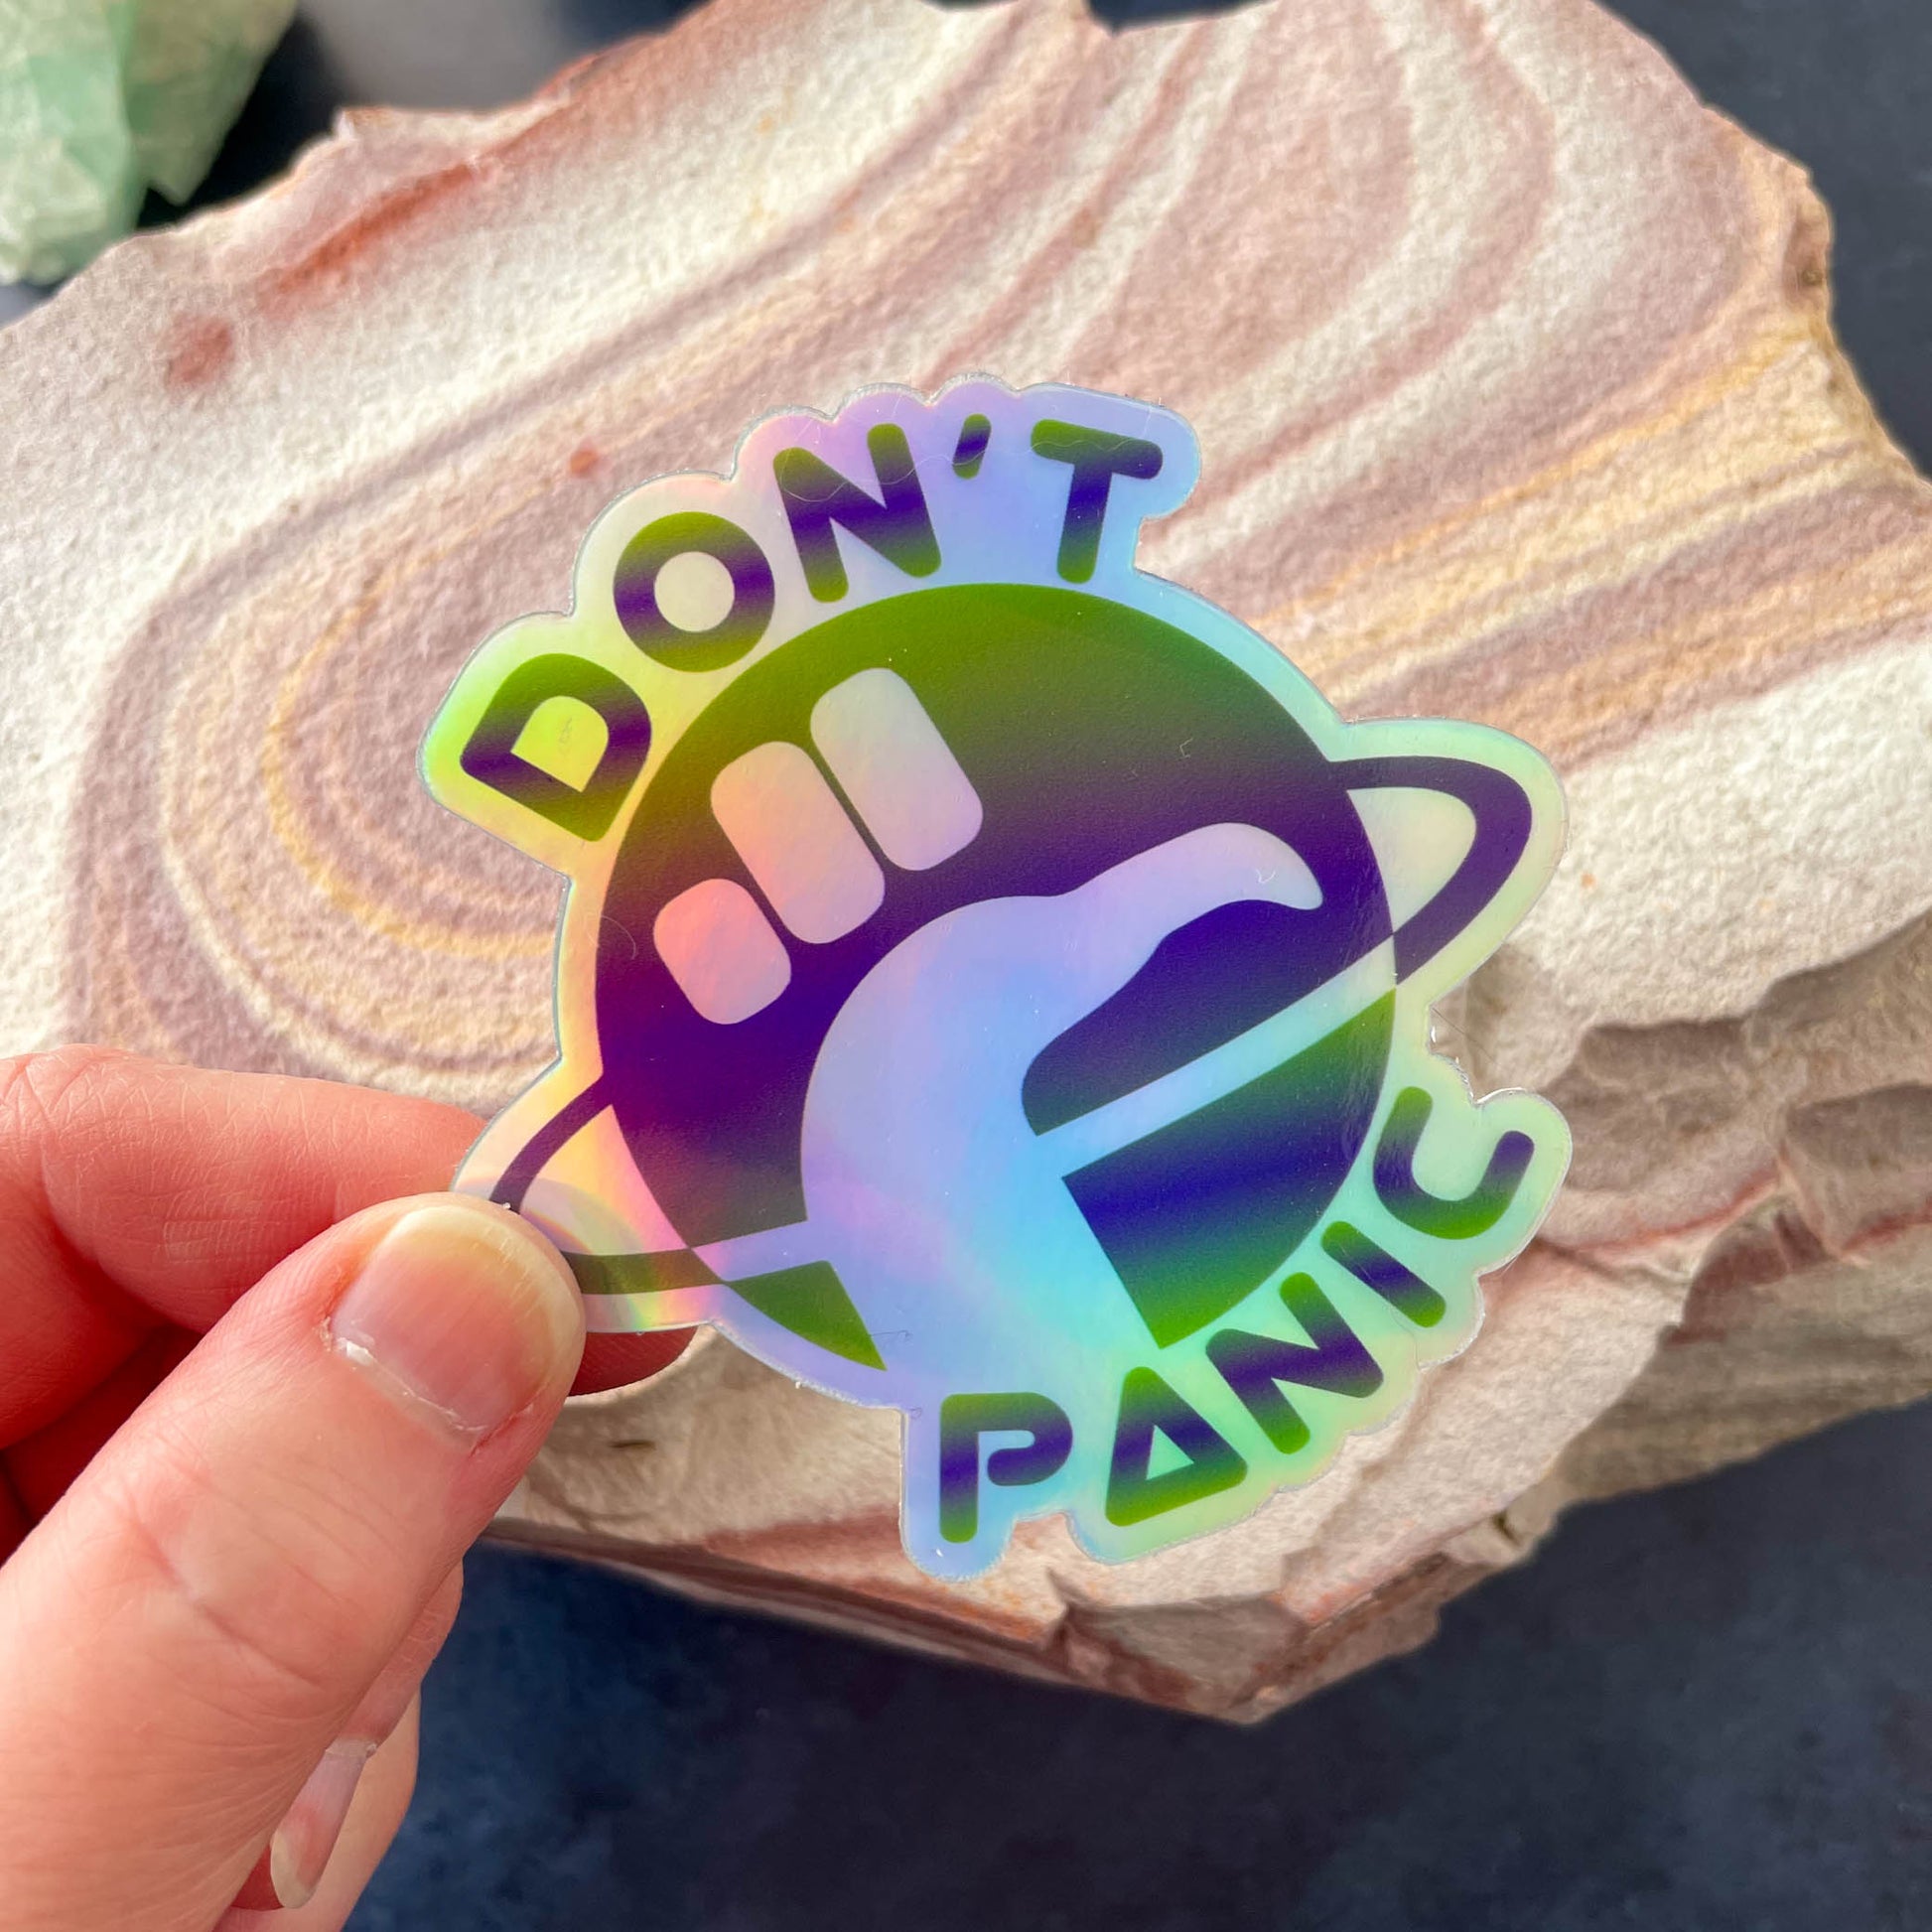 Don't Panic Holographic 3" Sticker in hand